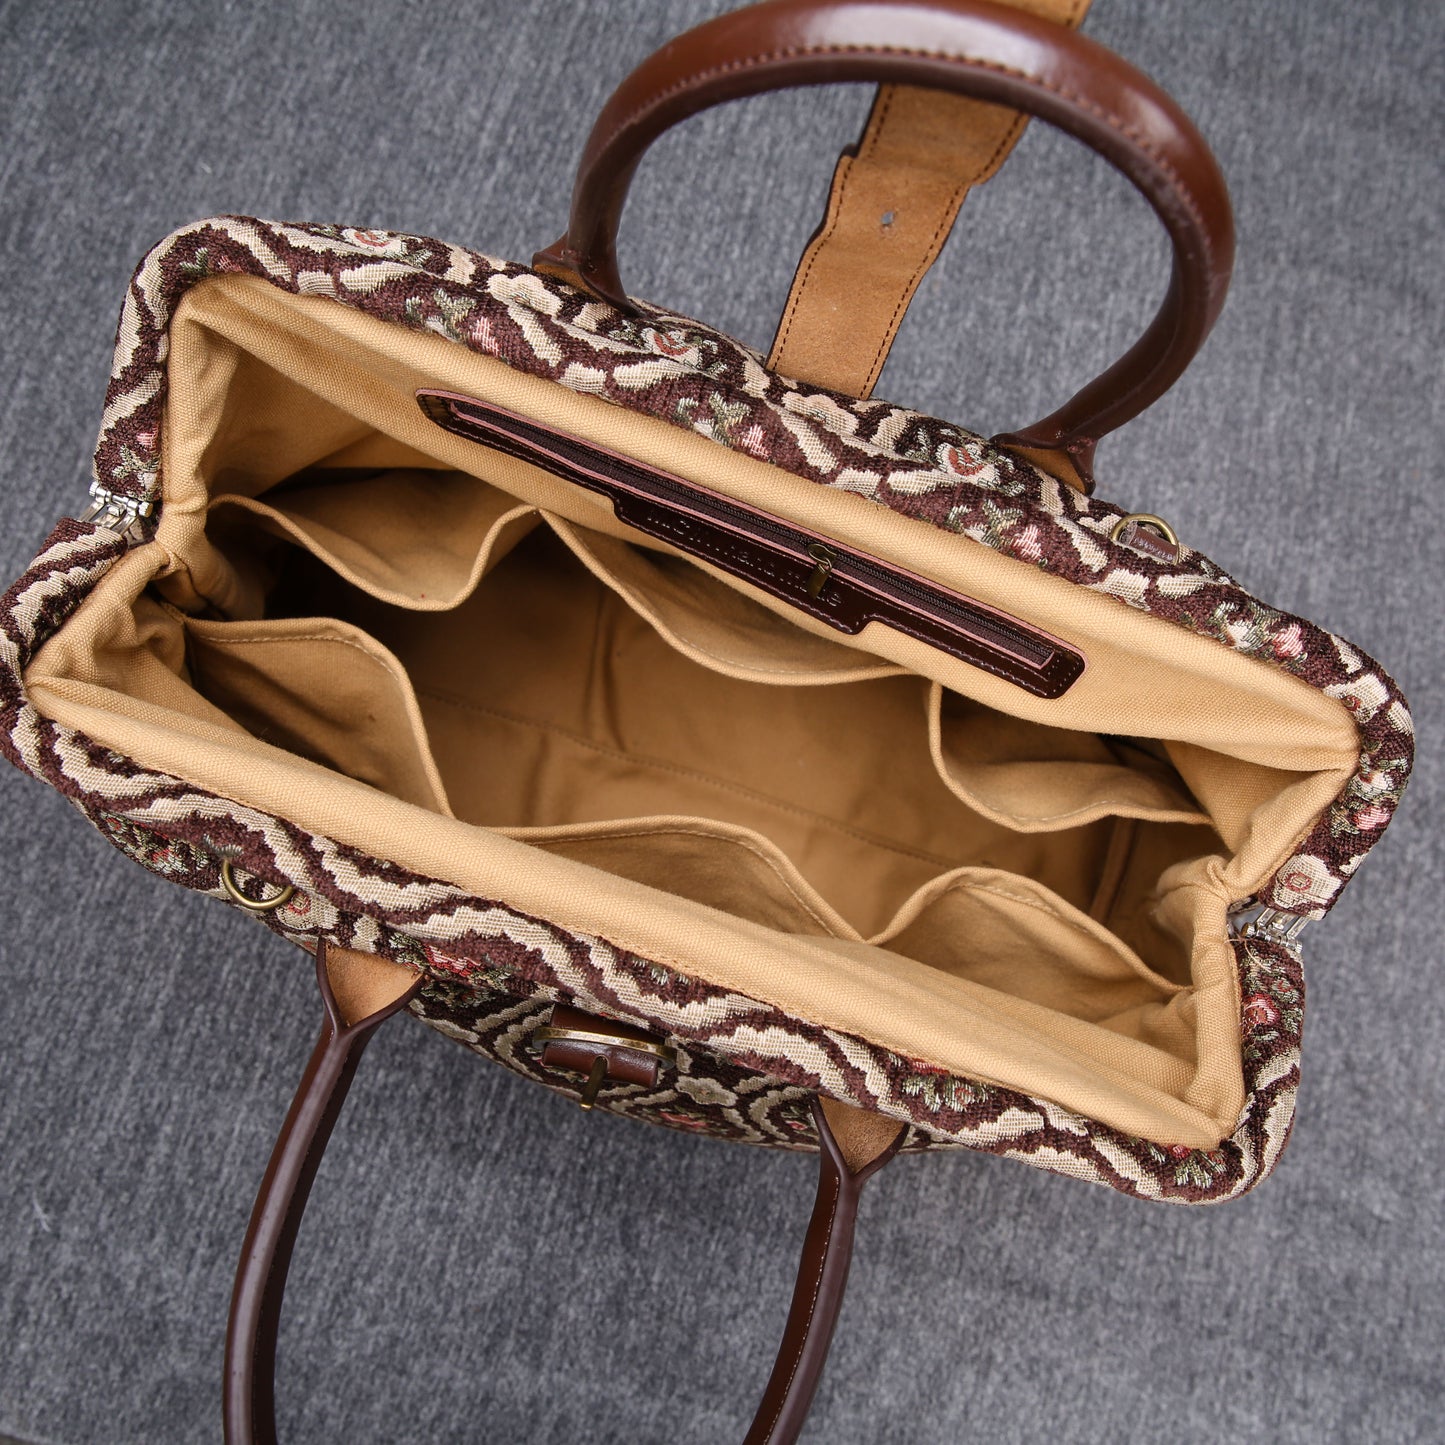 Mary Poppins Carpet Bag<br>Traditional Coffee